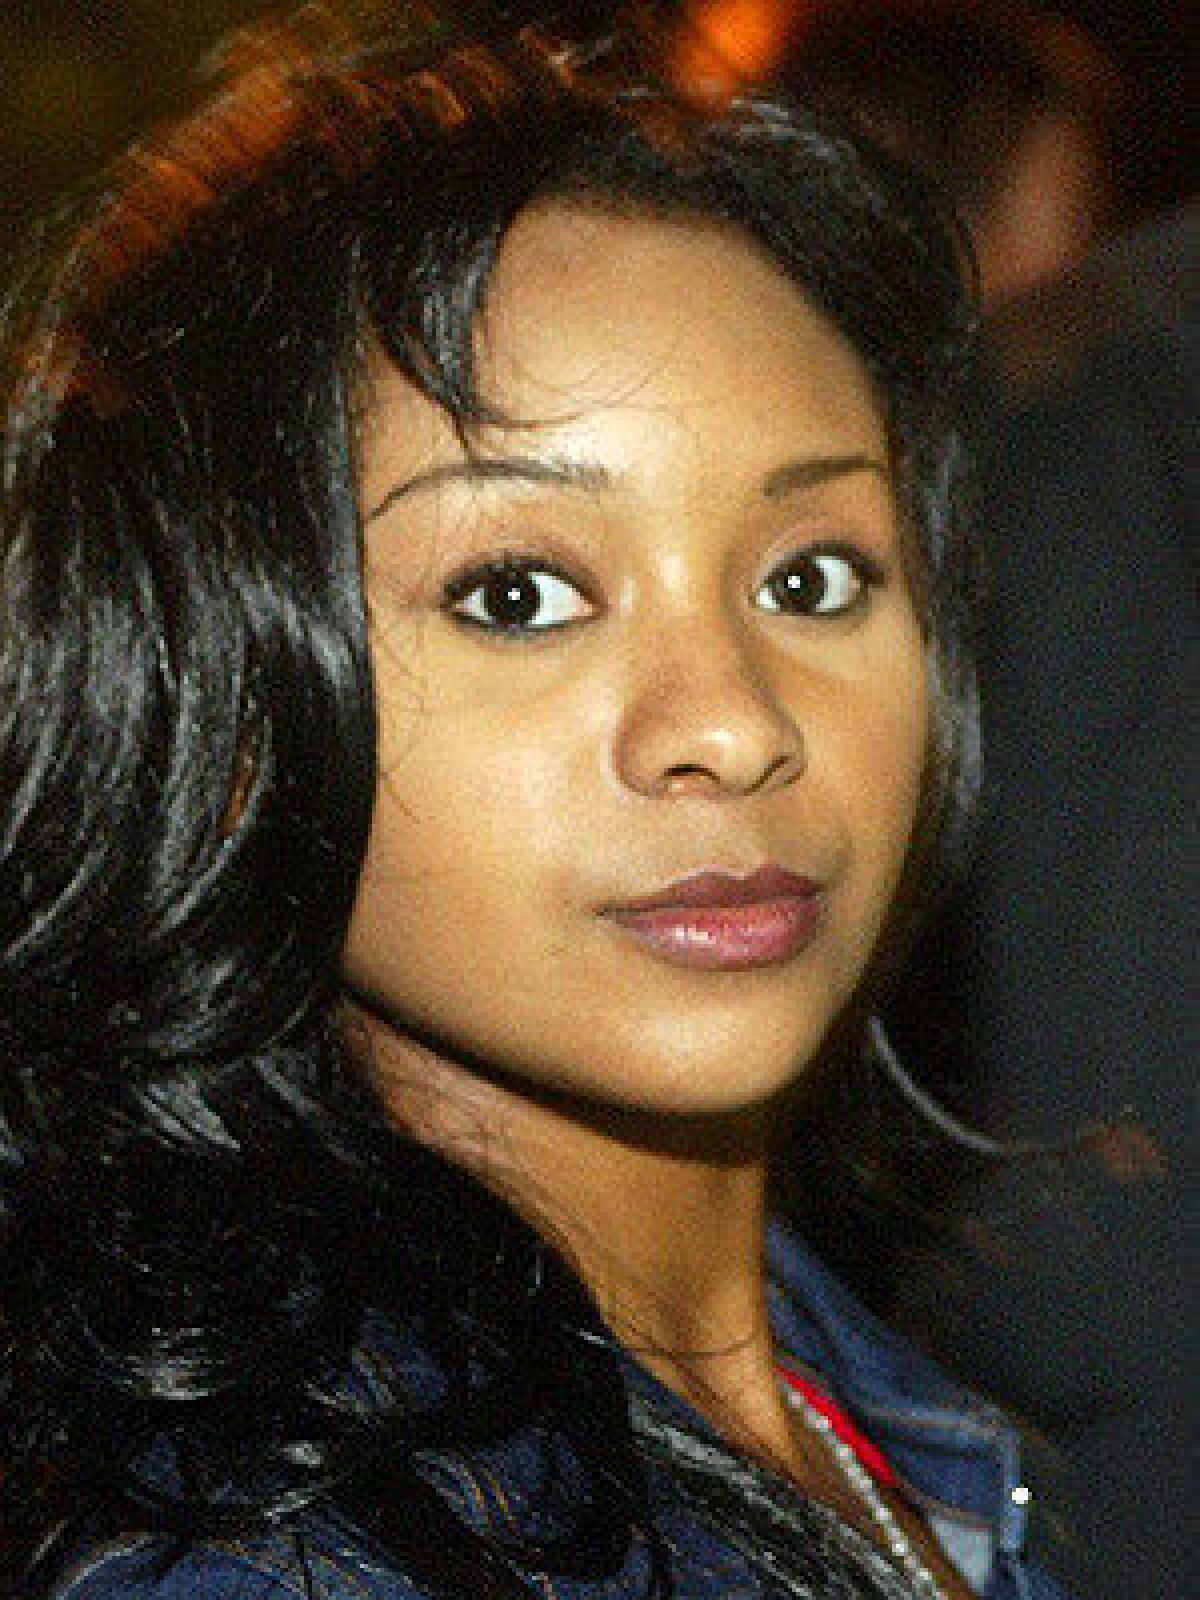 Natina Reed, actress and singer with the R&B; group Blaque, died on Friday near Atlanta.